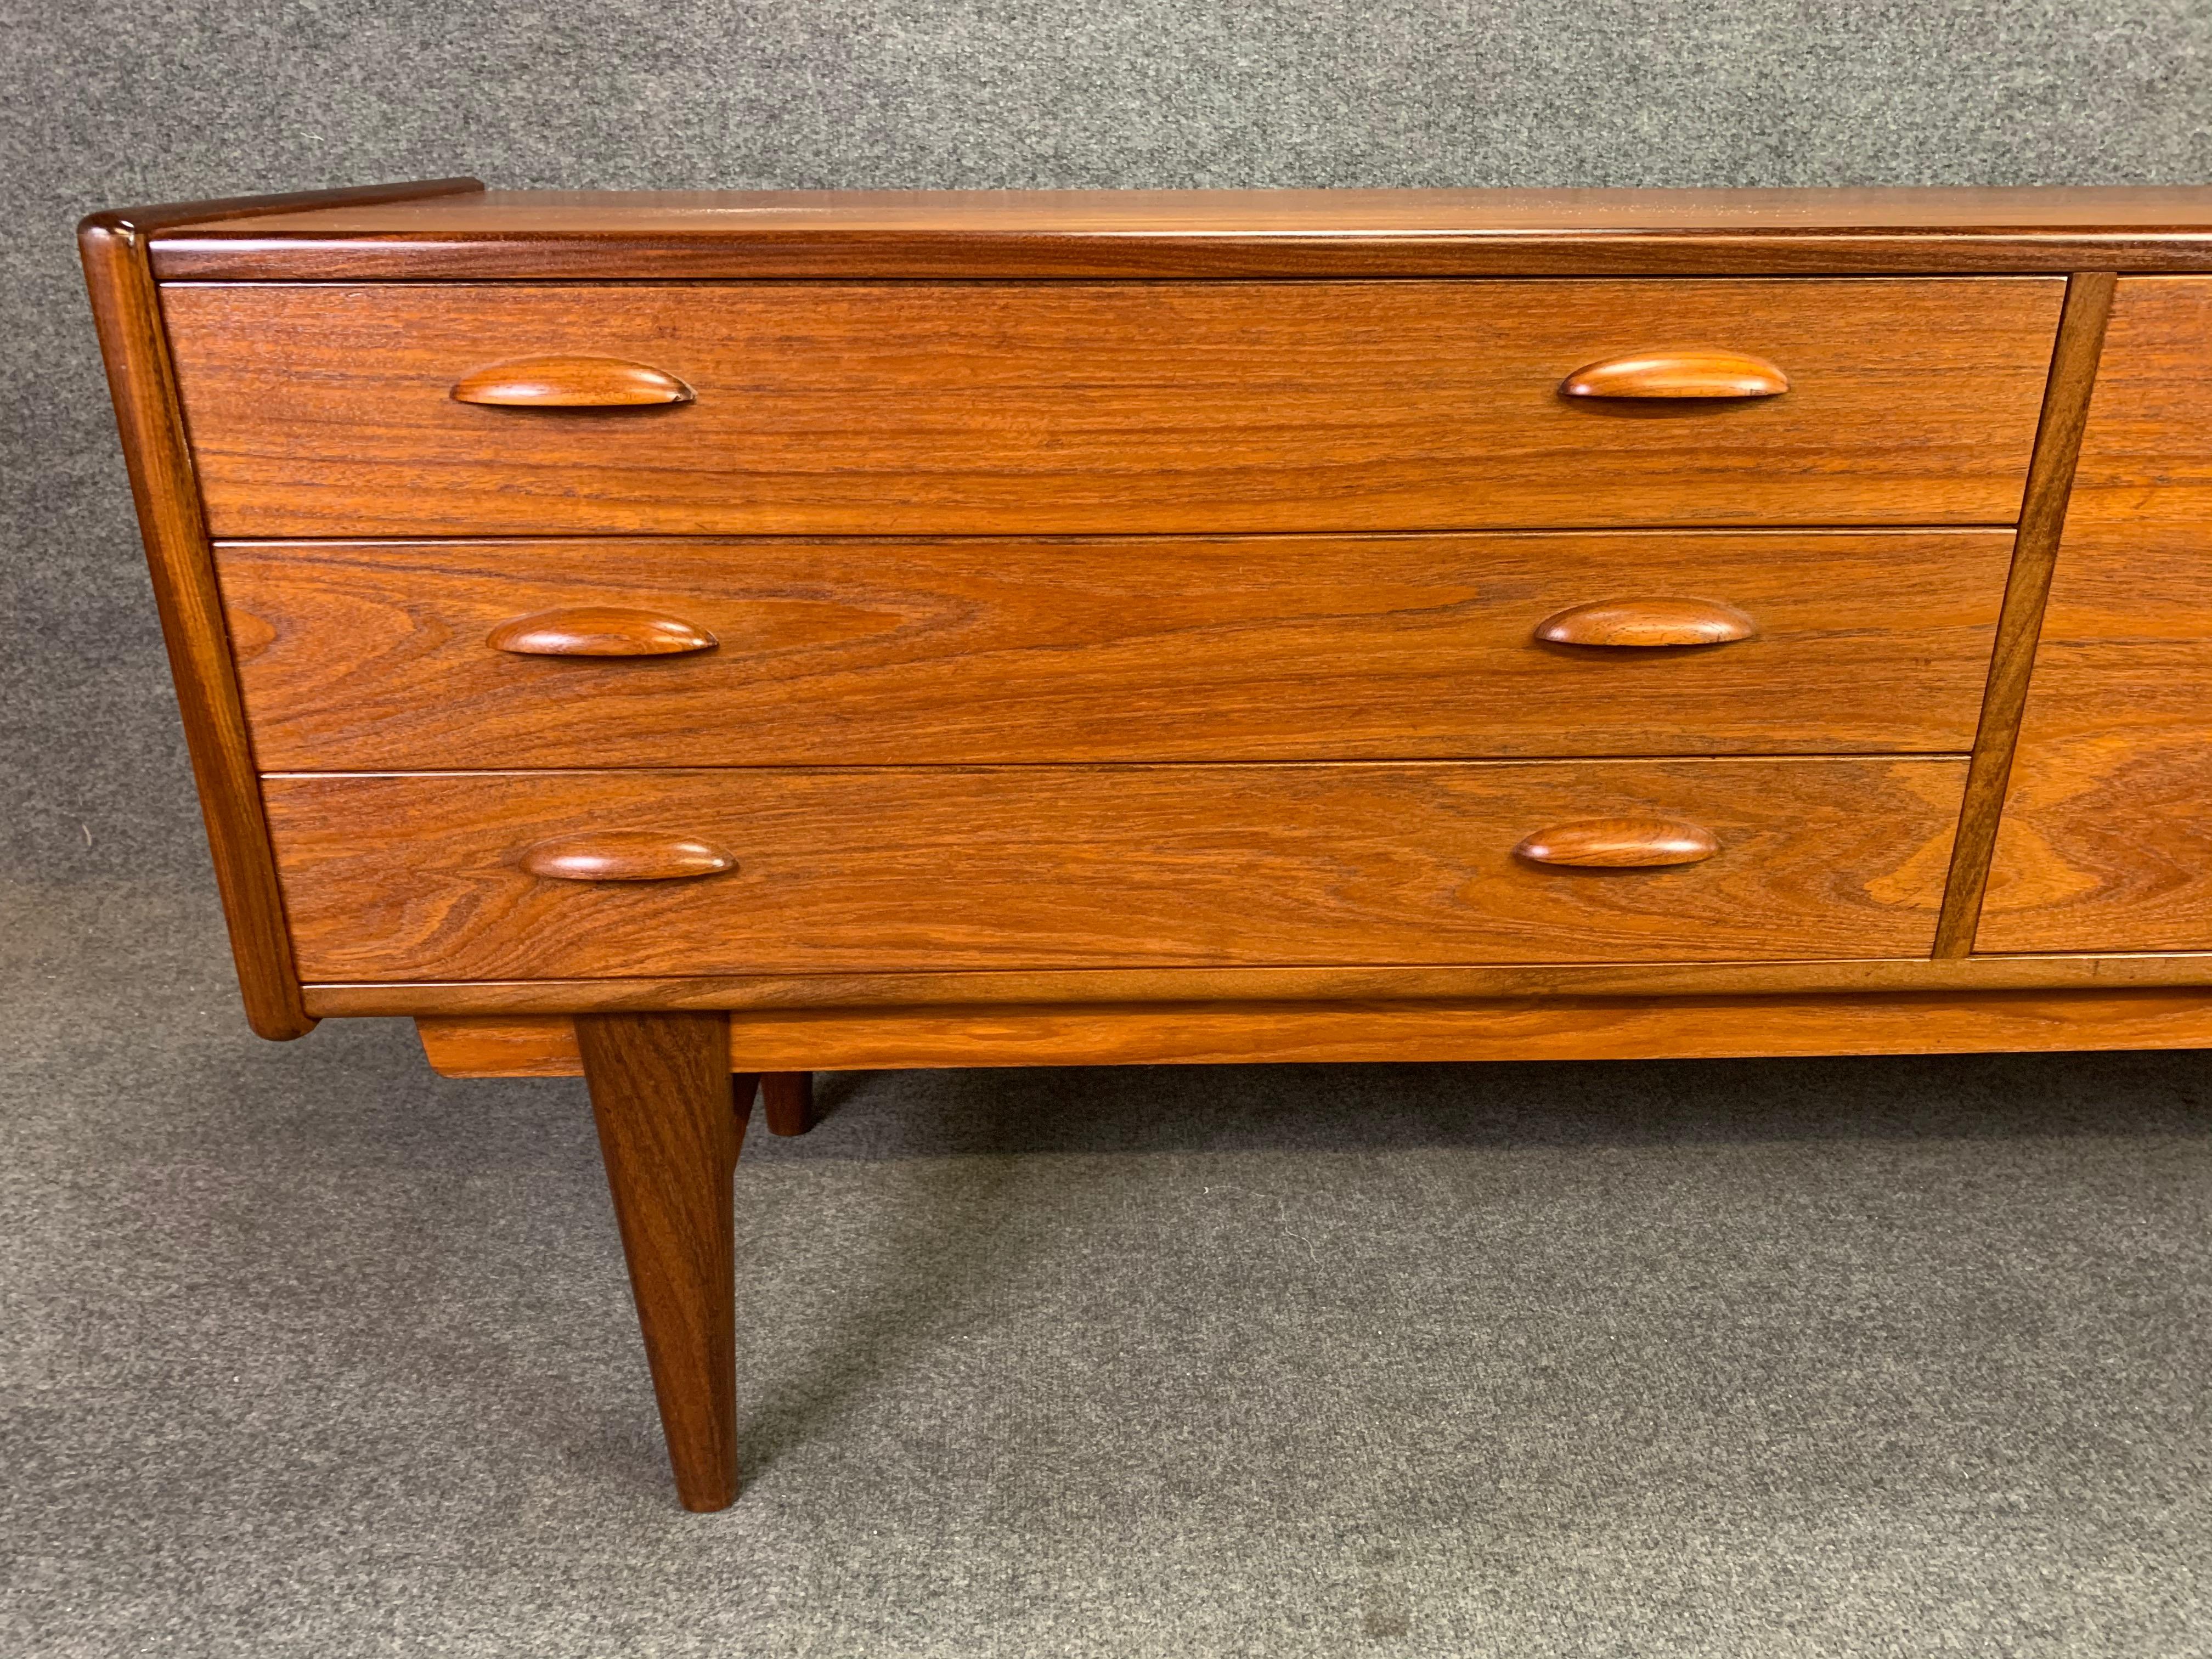 Here is a beautiful 1960s Scandinavian Modern sideboard in teak recently imported from Denmark to California before its restoration.
This case piece features a vibrant wood grain, a bank of three dove tail drawers with sculpted pulls and a drop